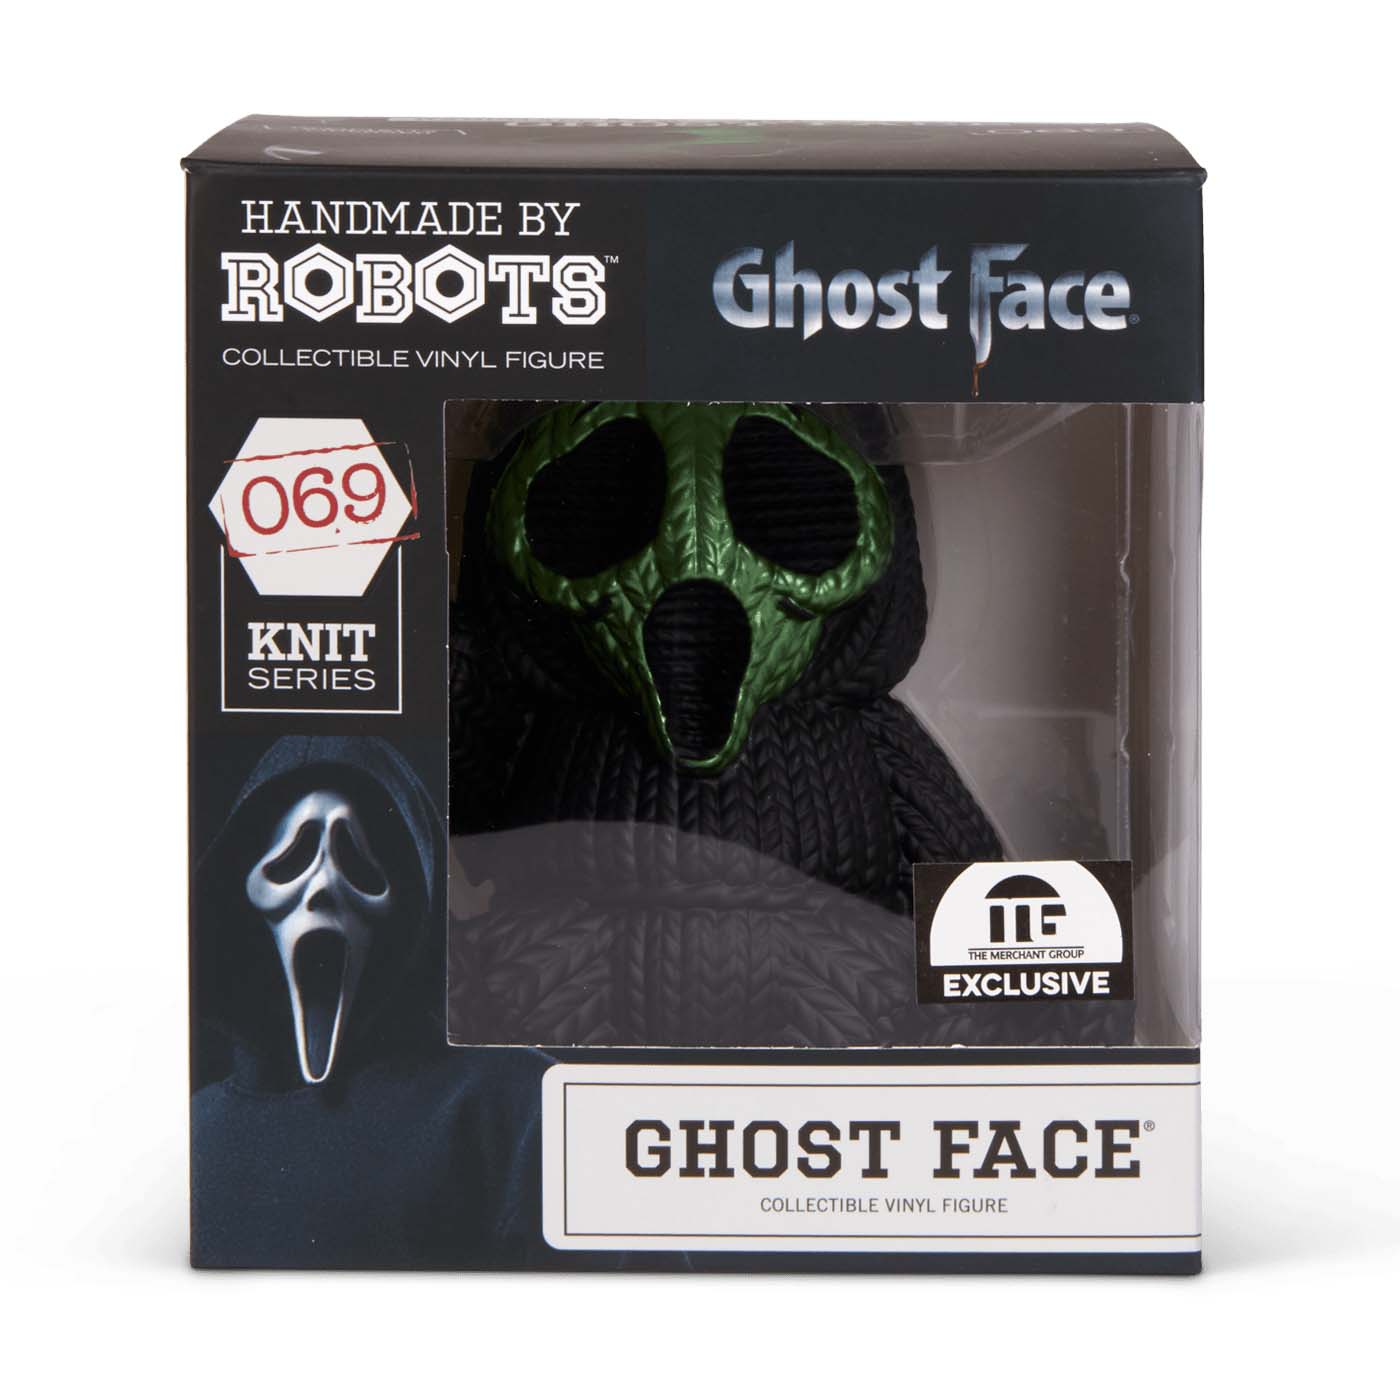 Handmade By Robots Ghost Face The Merchant Group Exclusive Vinyl